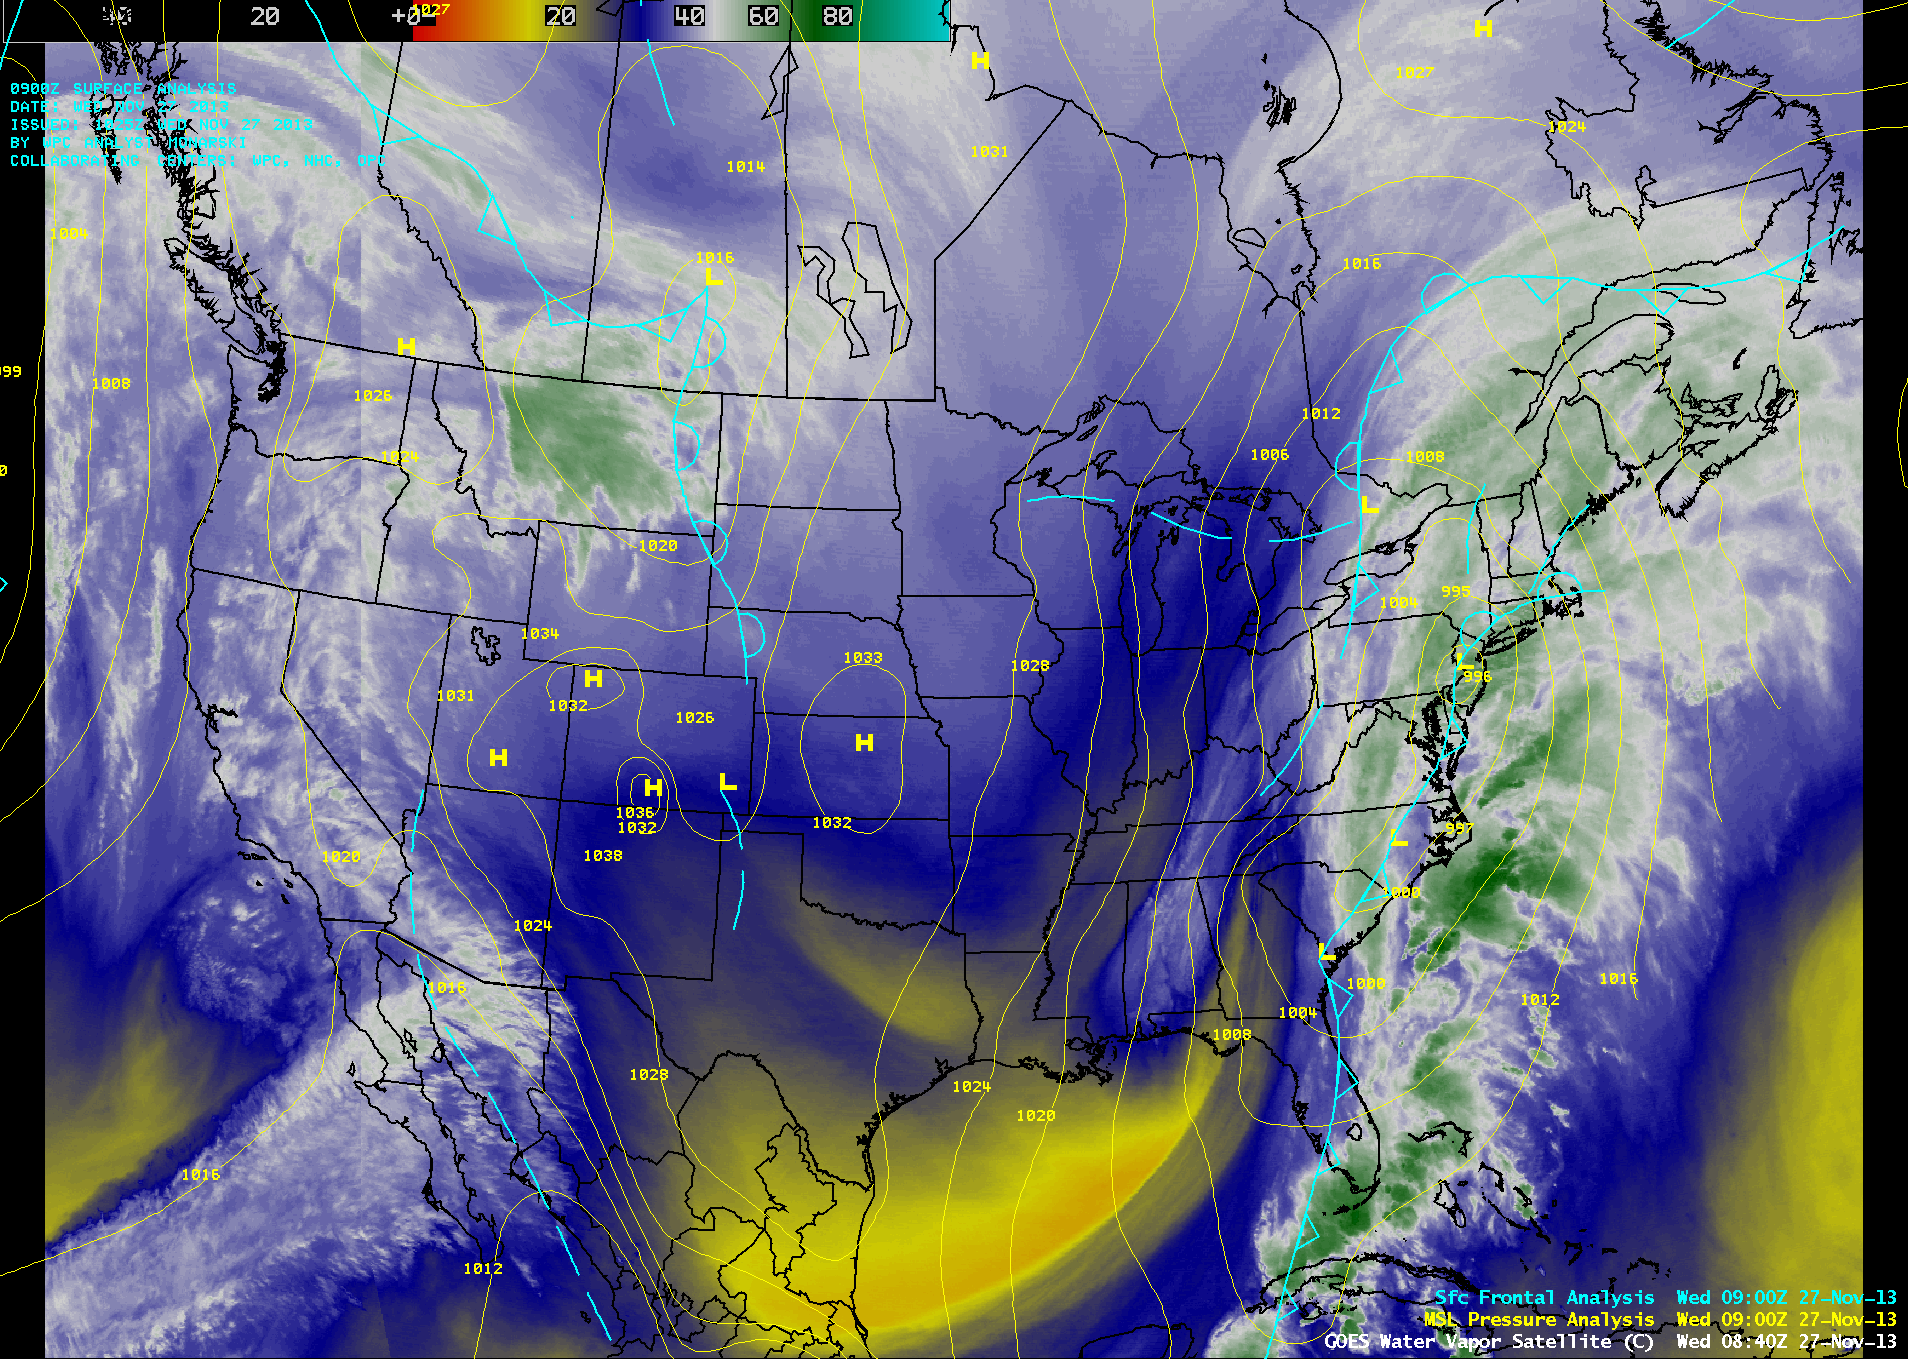 GOES-13 6.5 Âµm water vapor channel image, with surface pressure and surface front analysis